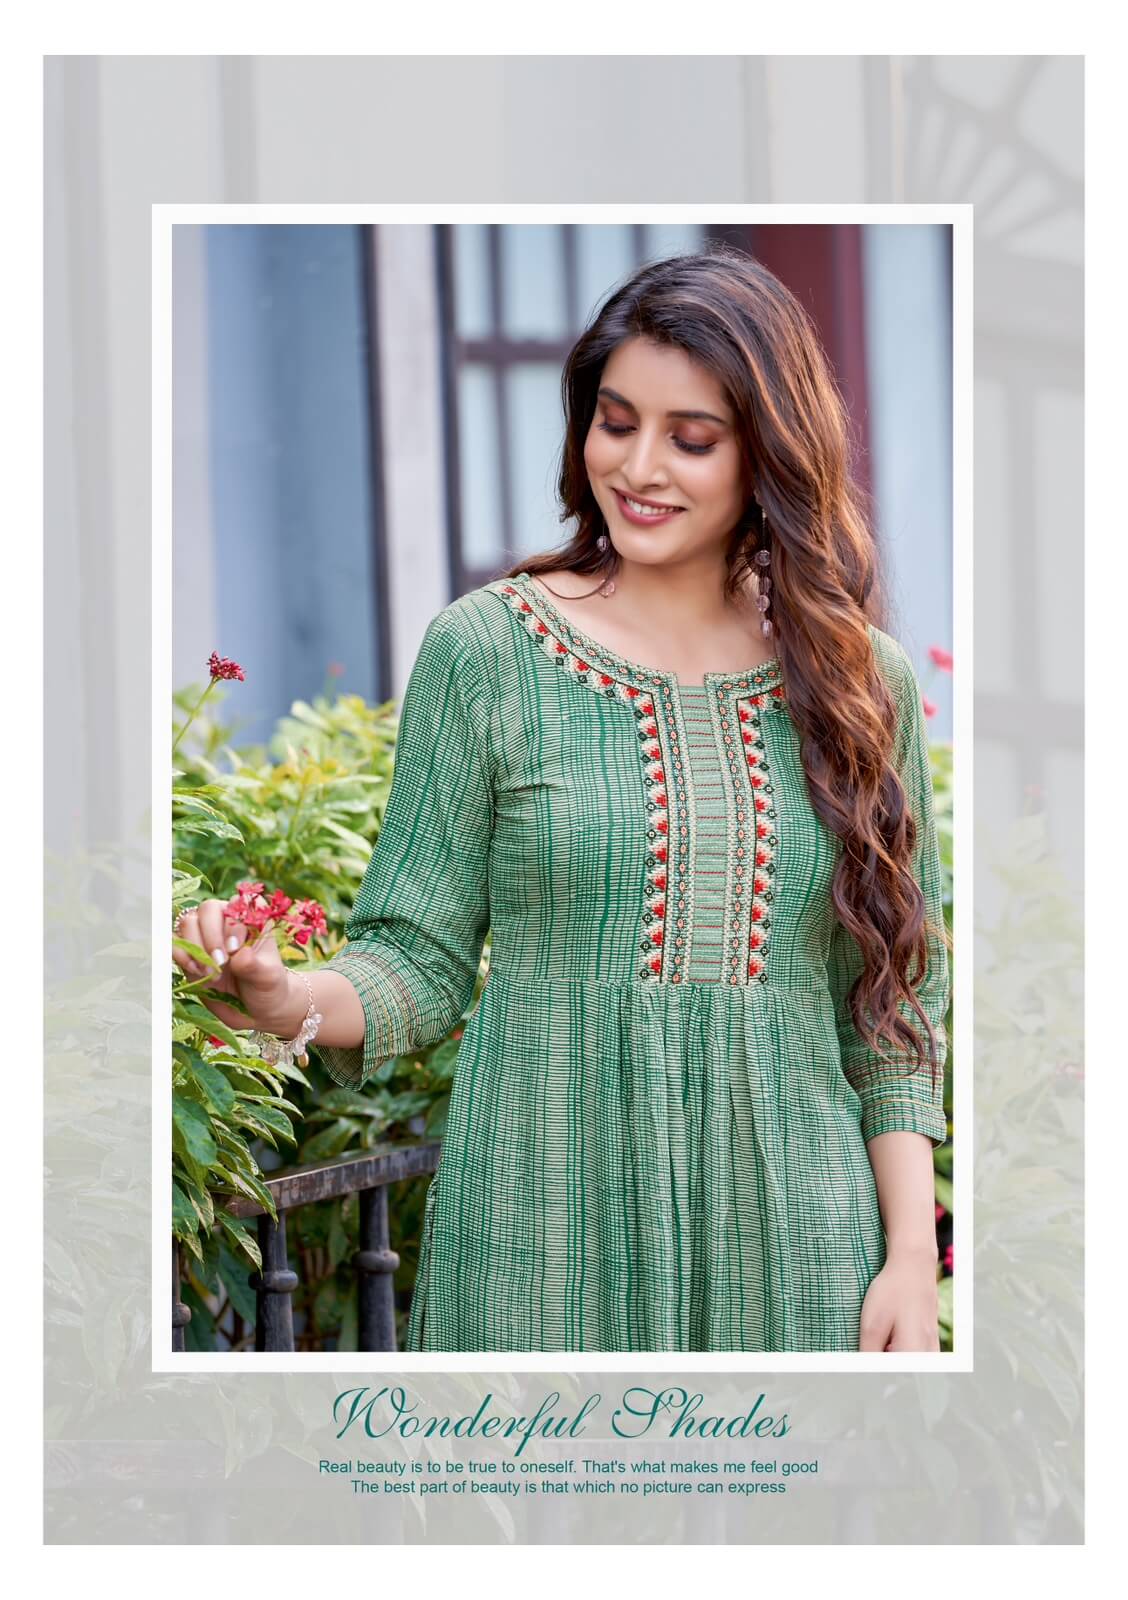 Buy Women and Girls Fashion Wear Online in India |SutiOnline